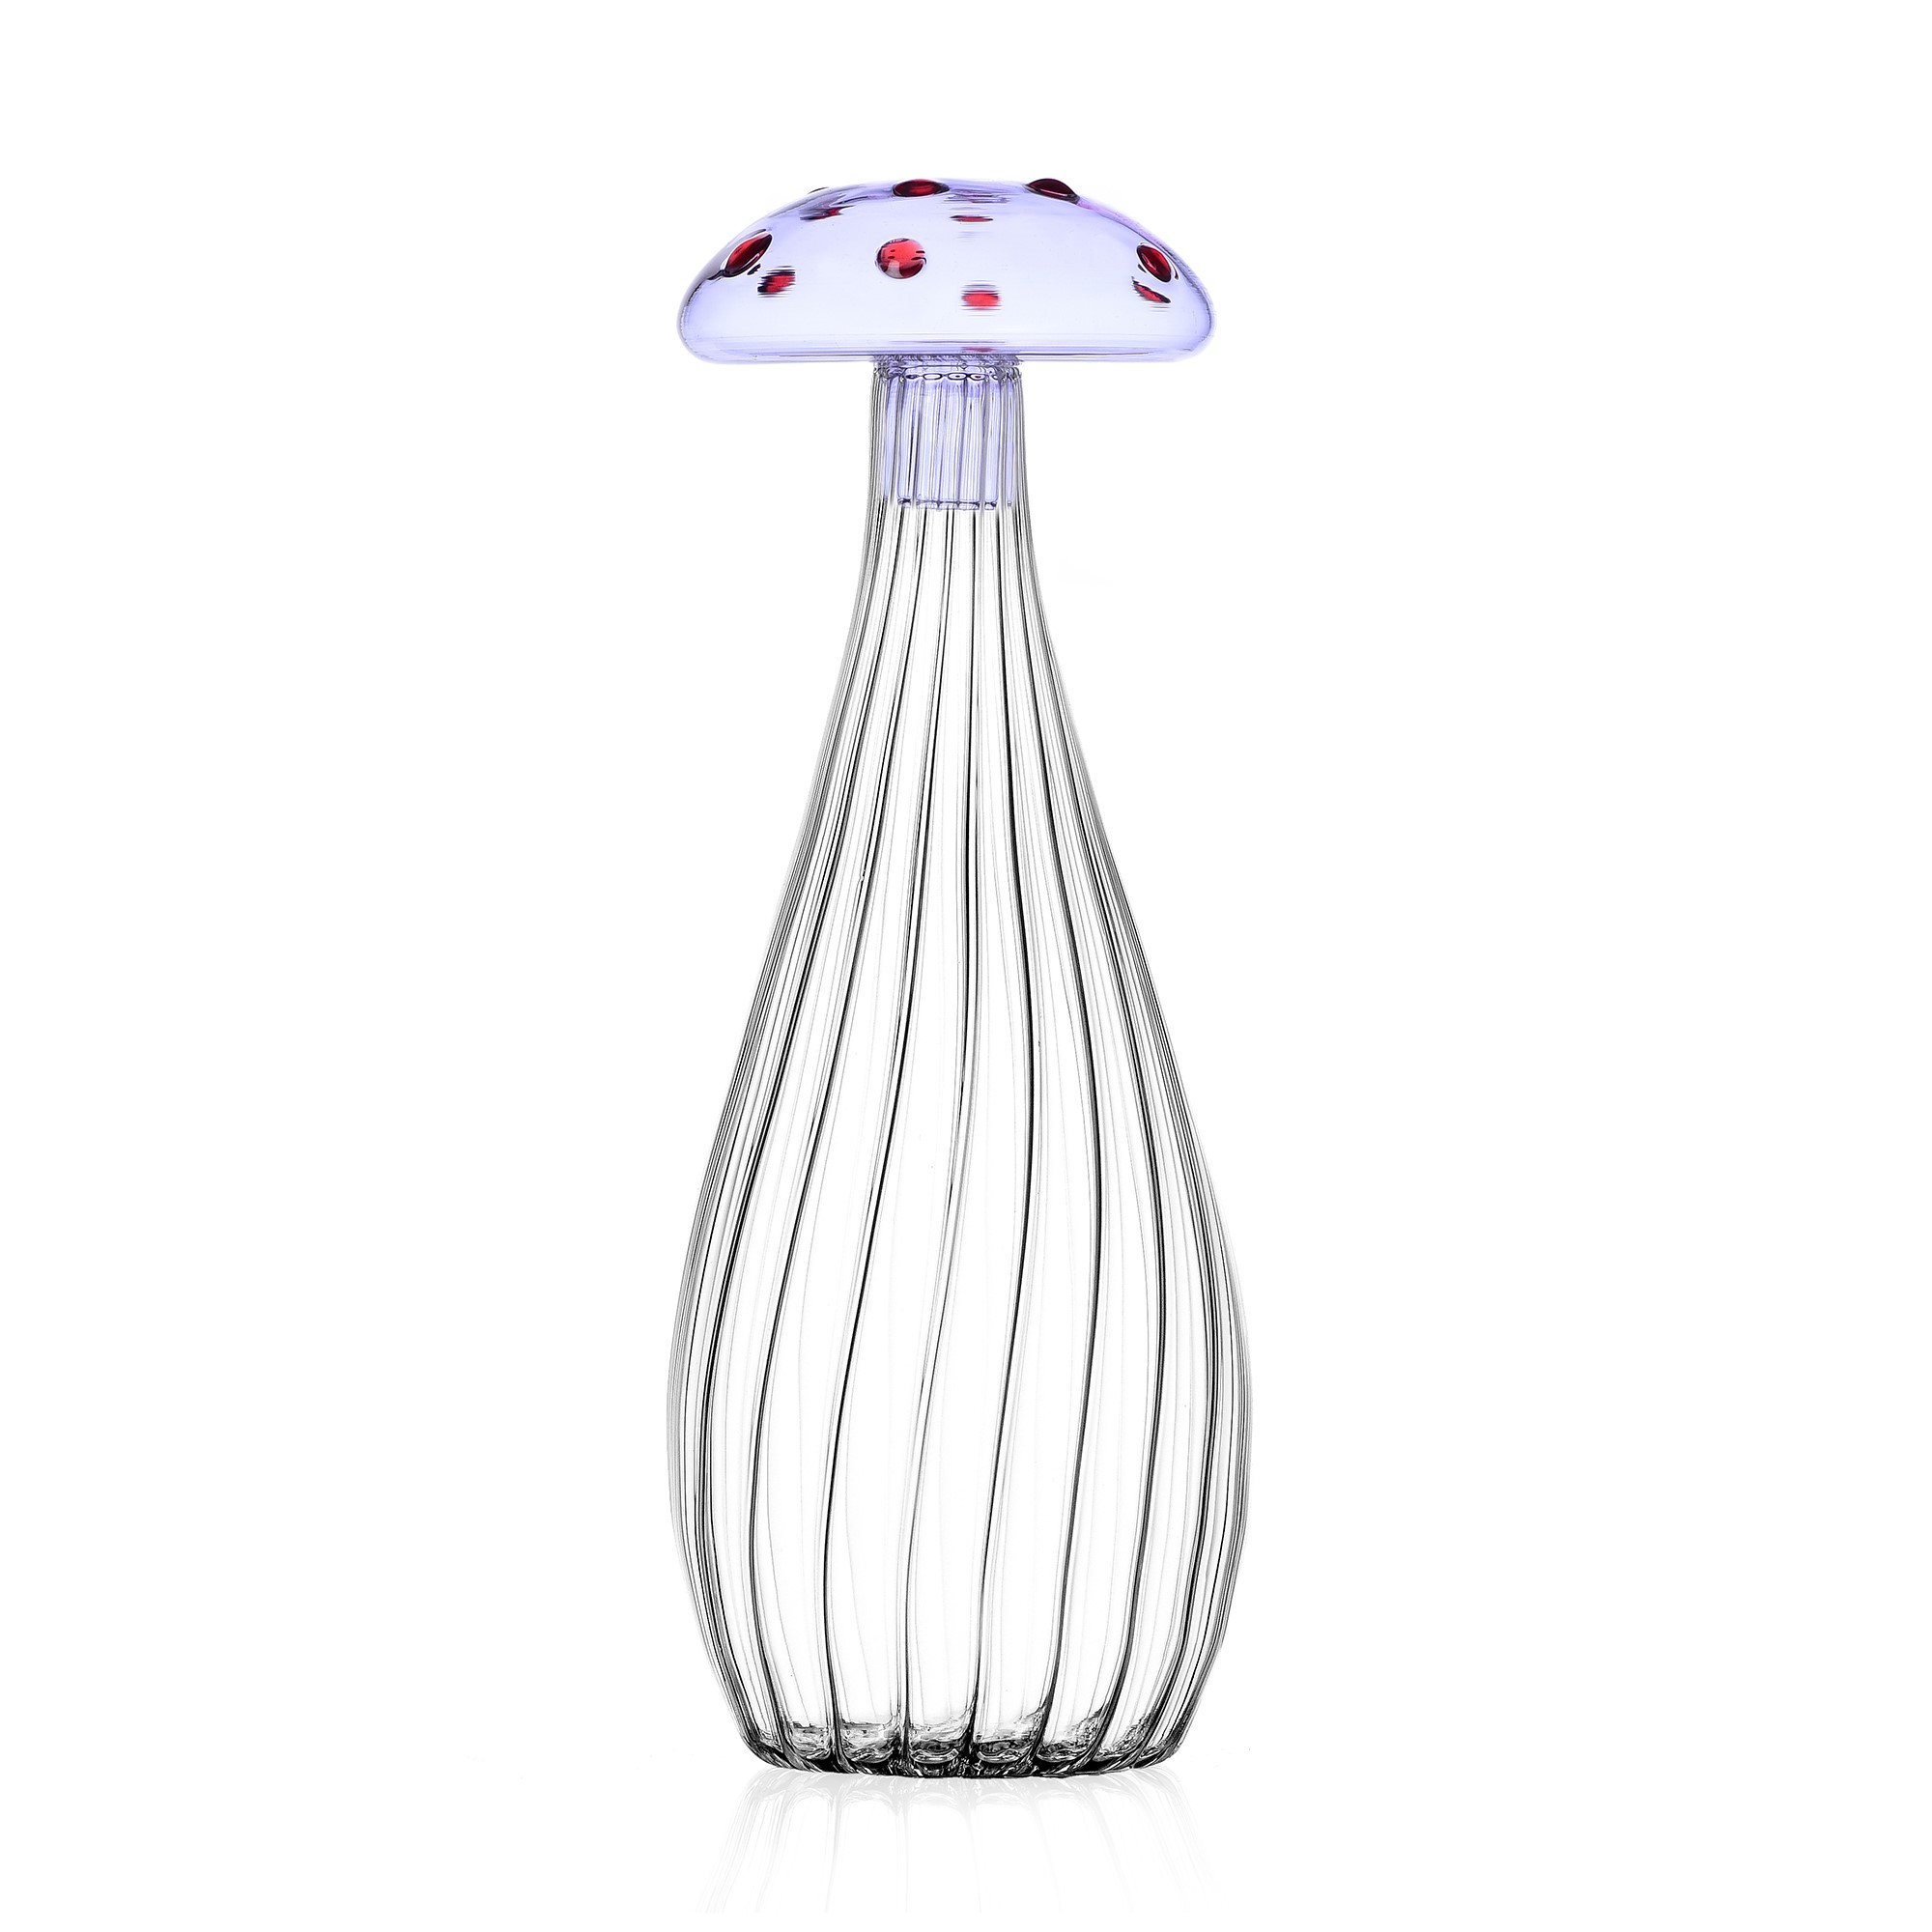 Bottle Ichendorf Collection Alice Purple Mushroom and Red Dots